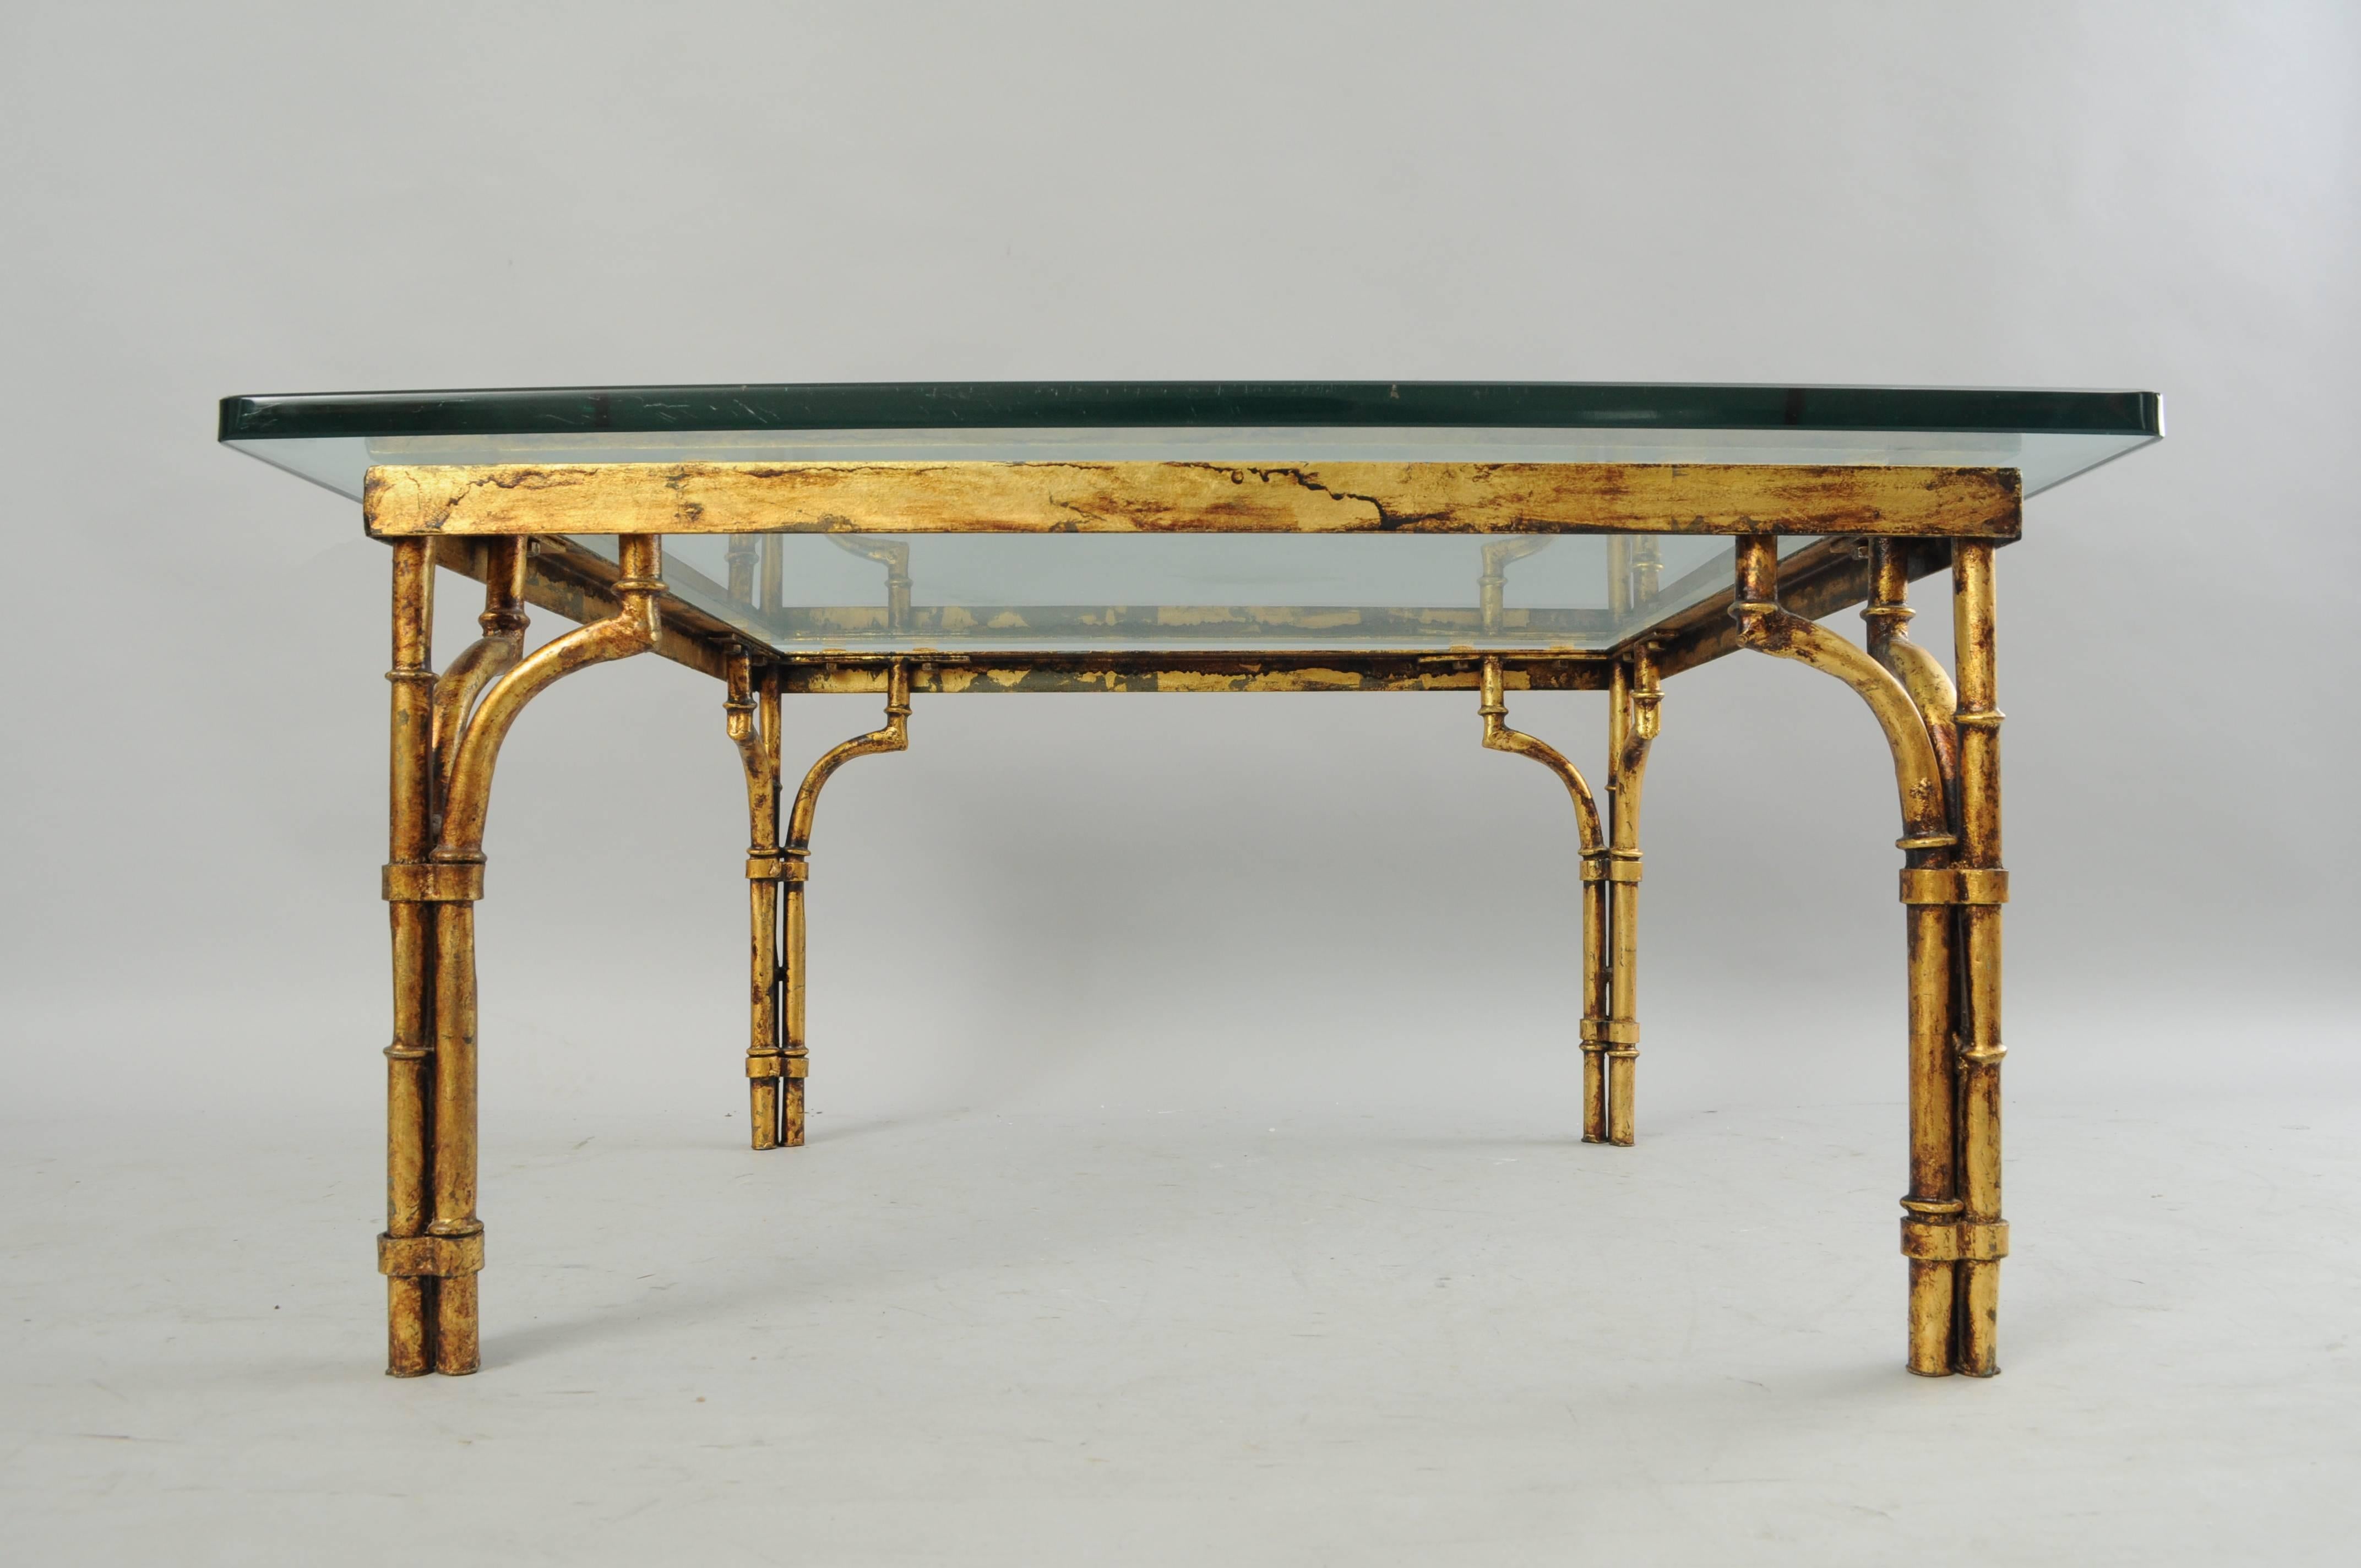 Vintage Italian Hollywood Regency gold gilt iron and glass faux bamboo square coffee table. Item features a 1